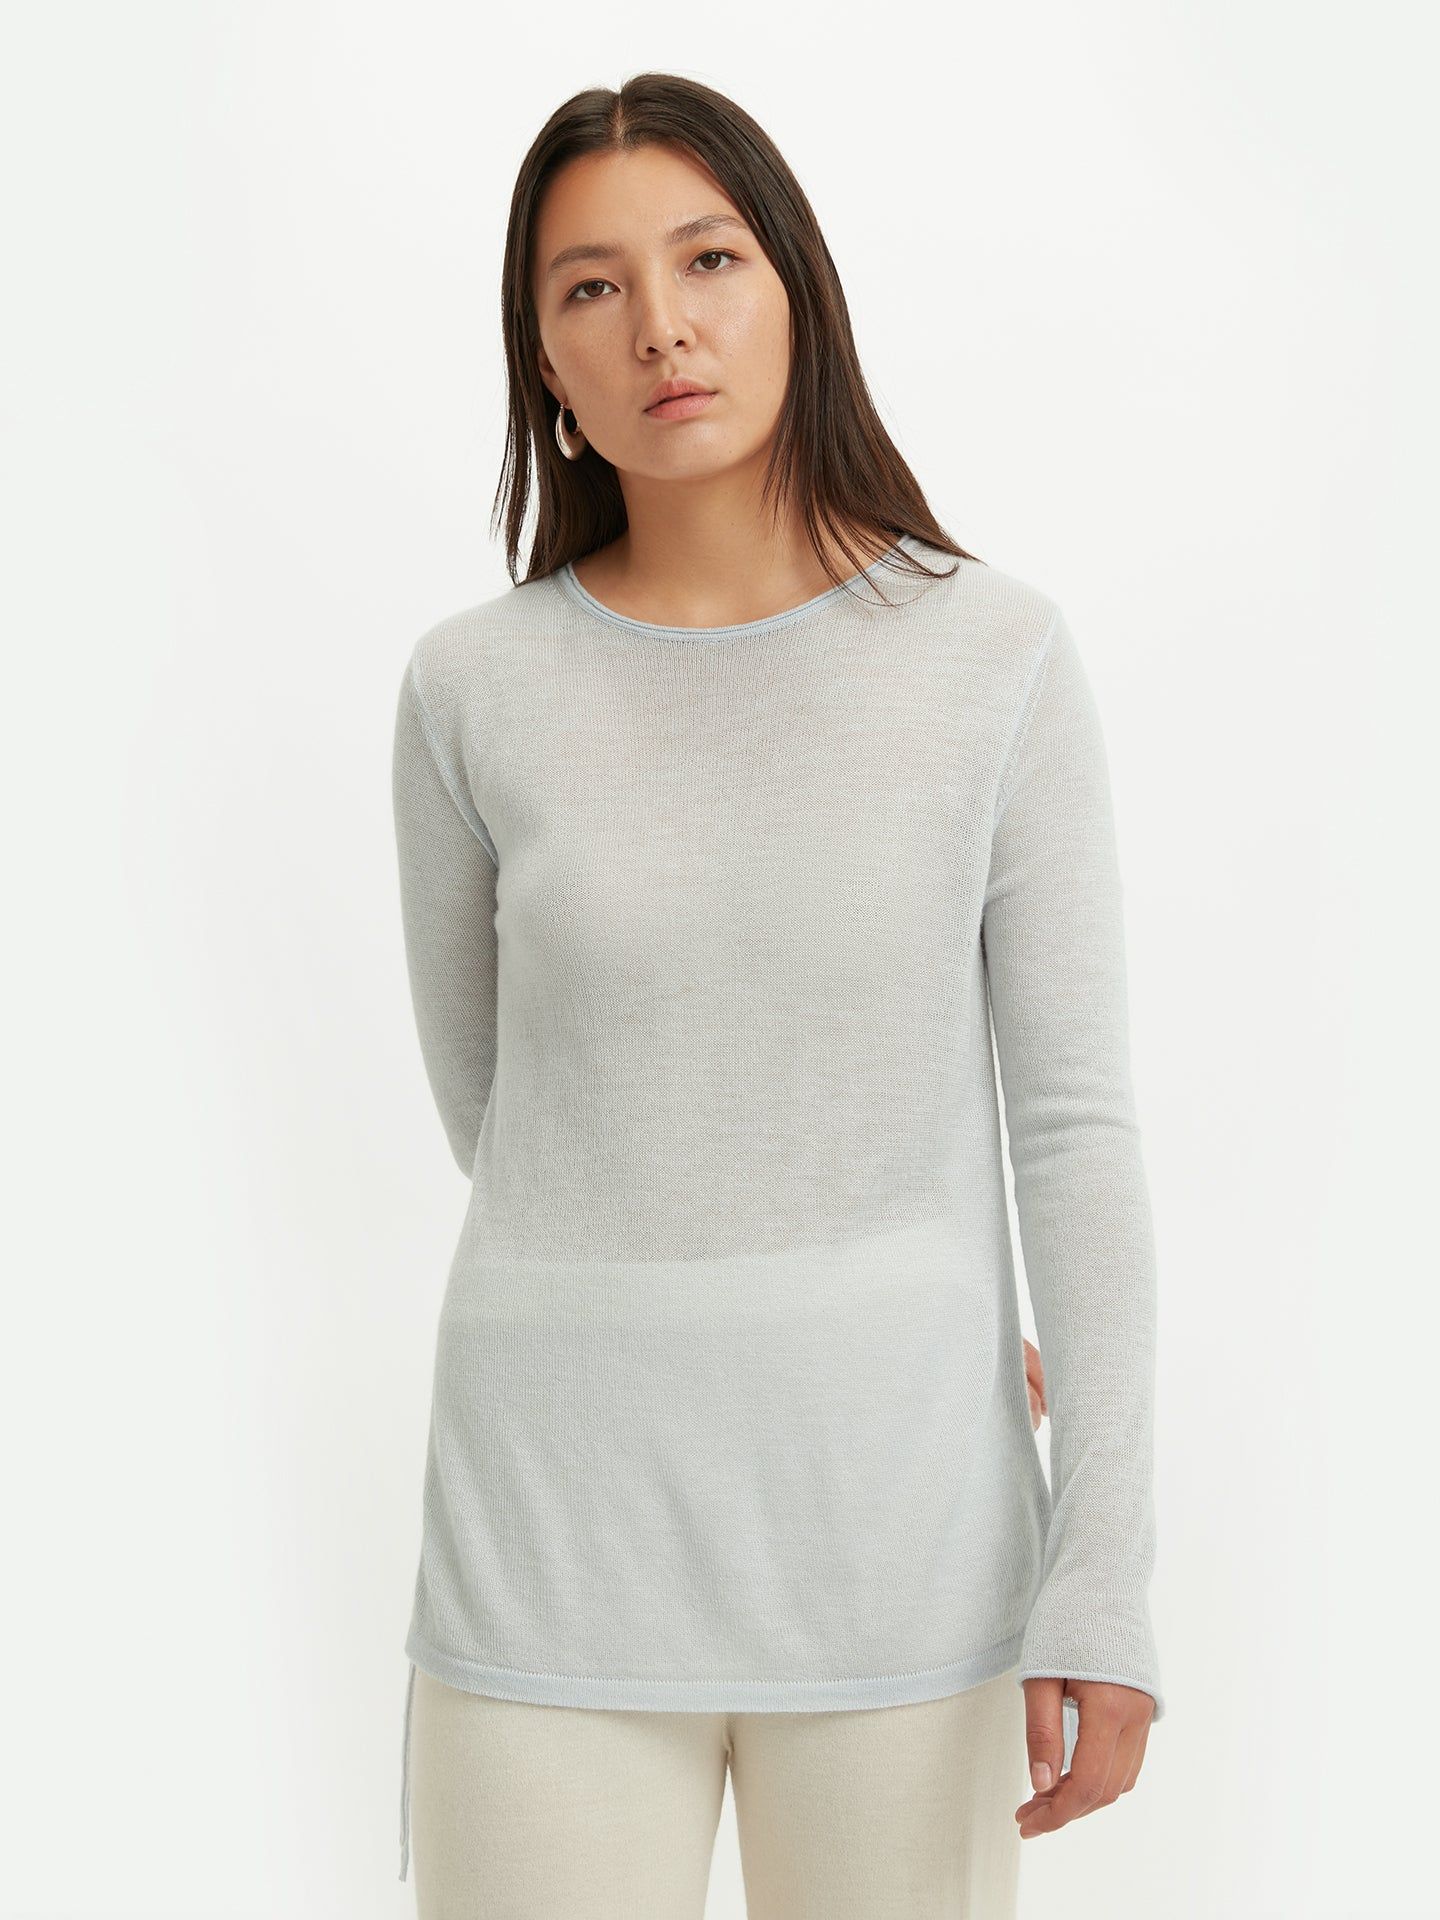 Gobi Womens Luxury Cashmere New Clothing Collection